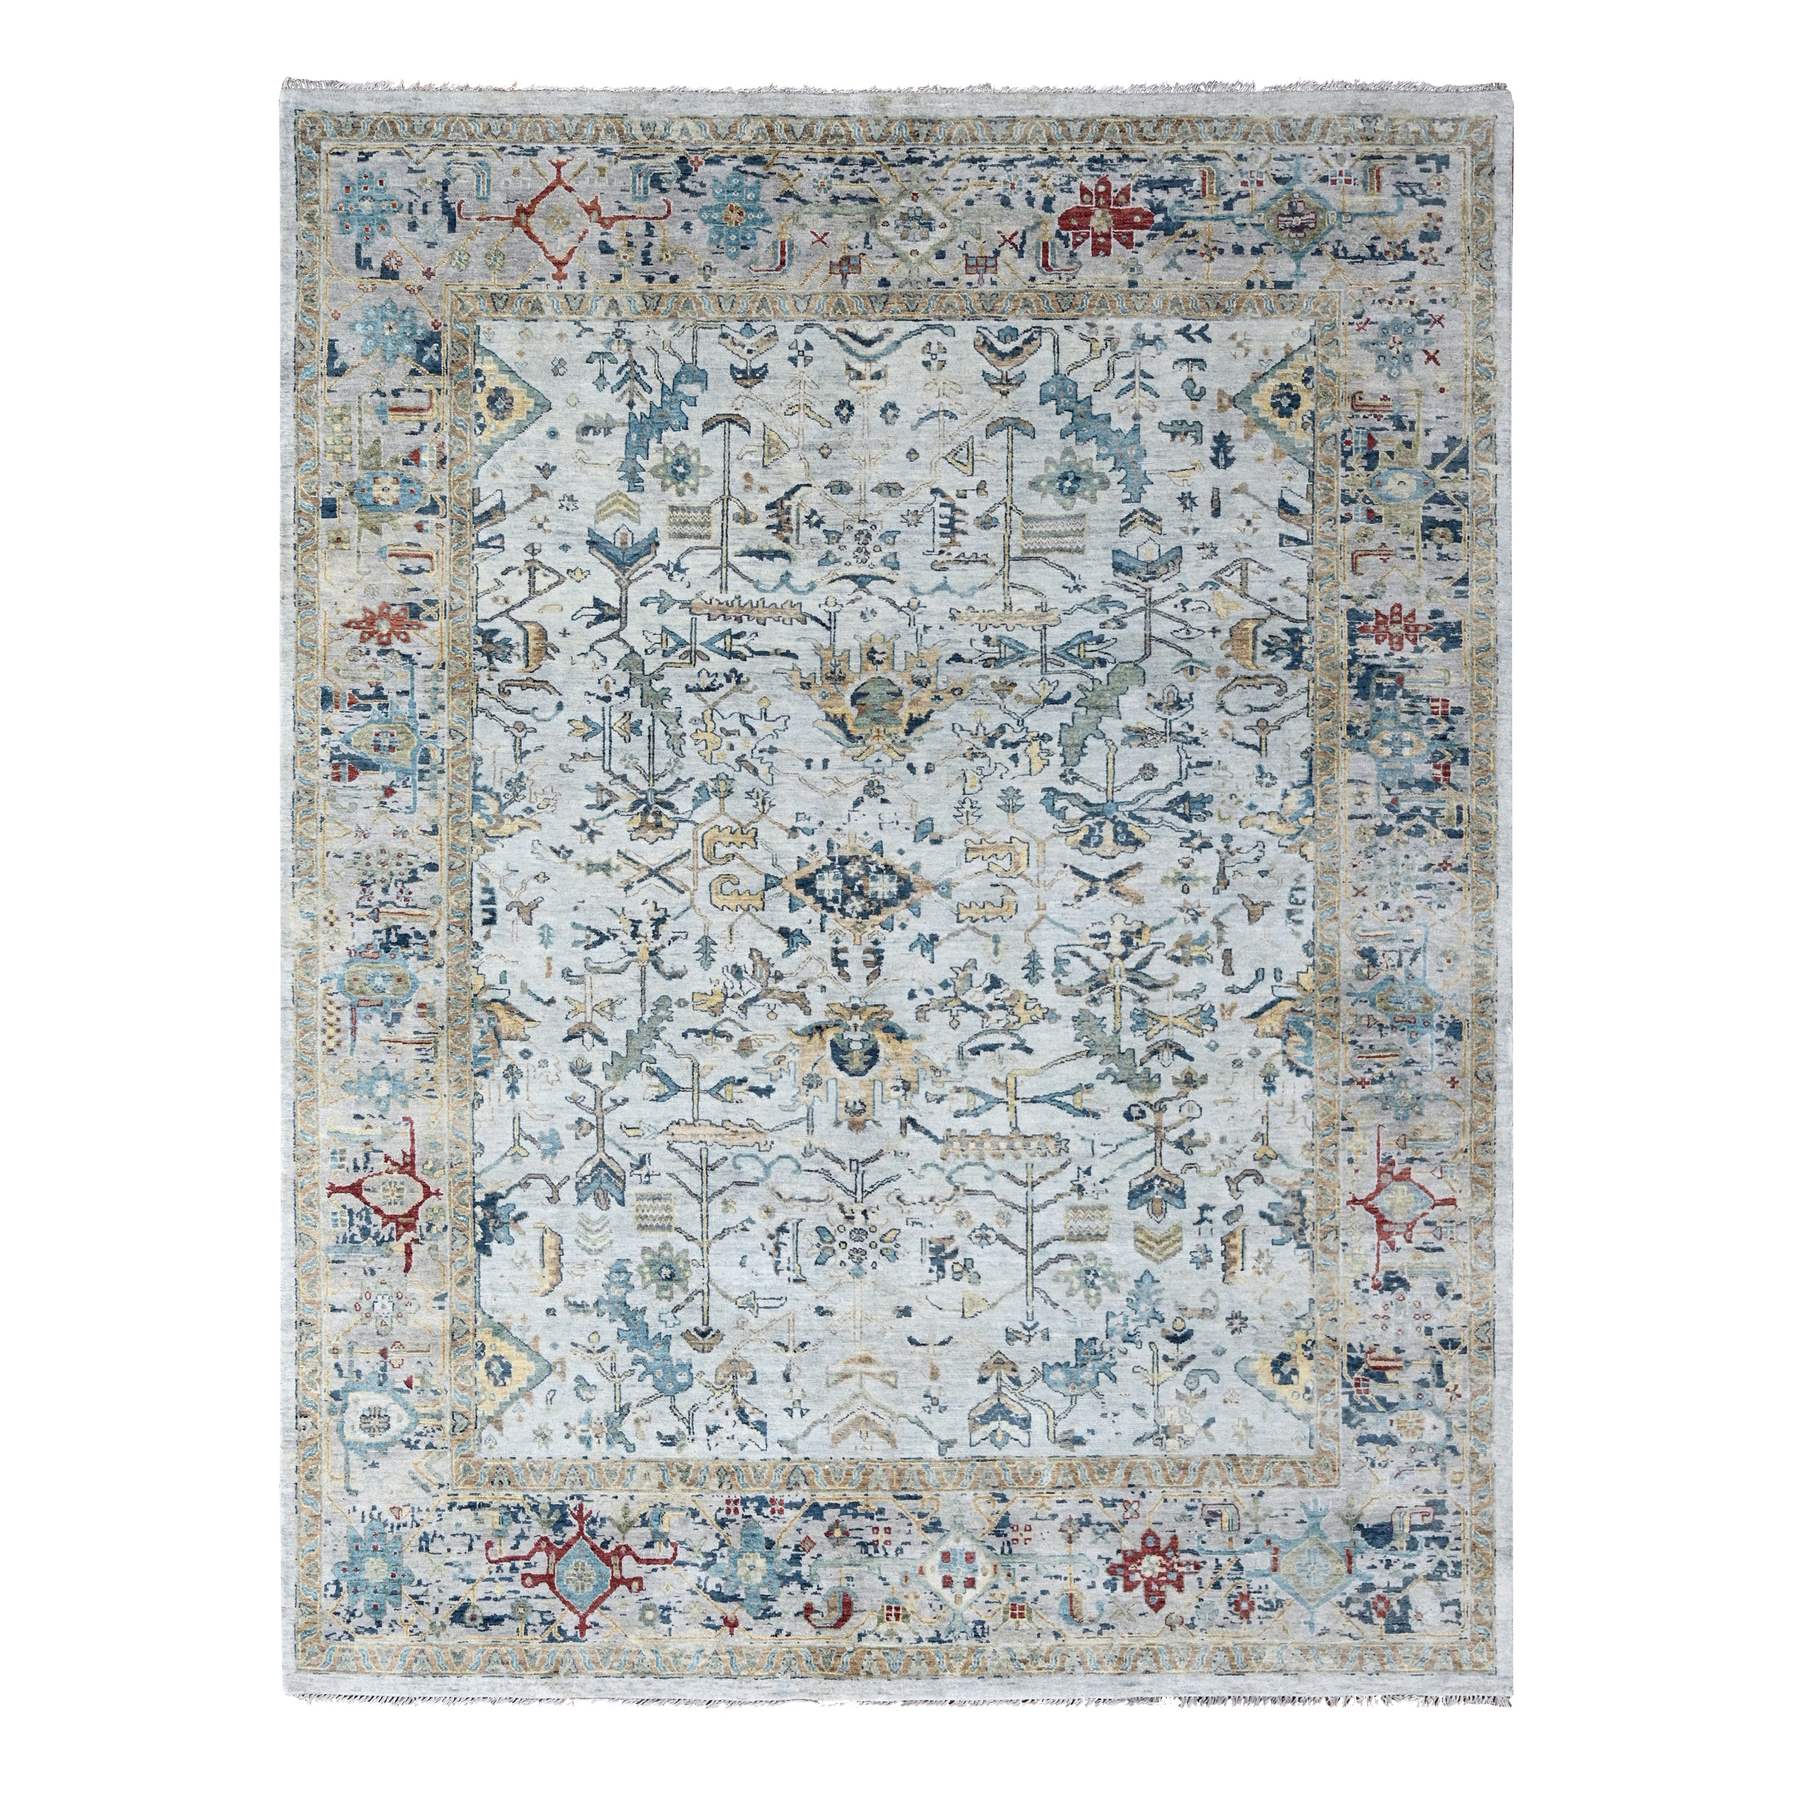 Windy Blue and Shiny Luster Gray, Densely Woven, Hand Knotted, Broken Erased Persian Heriz All Over Design 100% Wool Soft Color Pallet, Oriental Rug